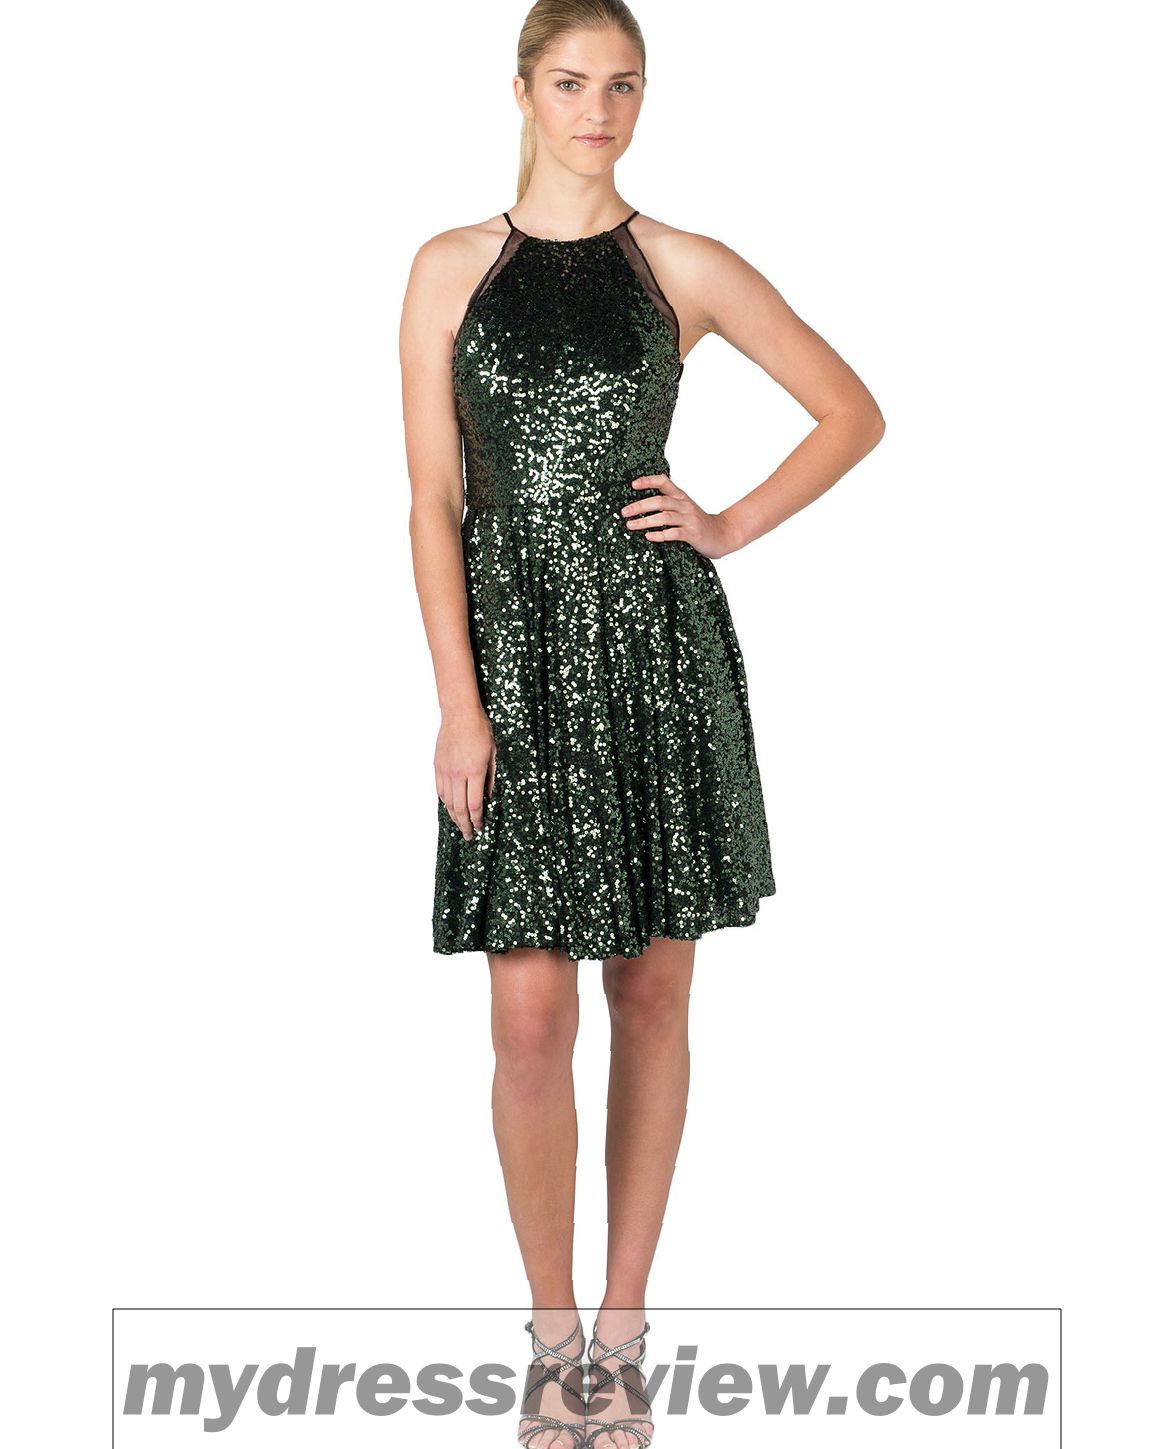 Emerald Green Sequin Gown - Review Clothing Brand